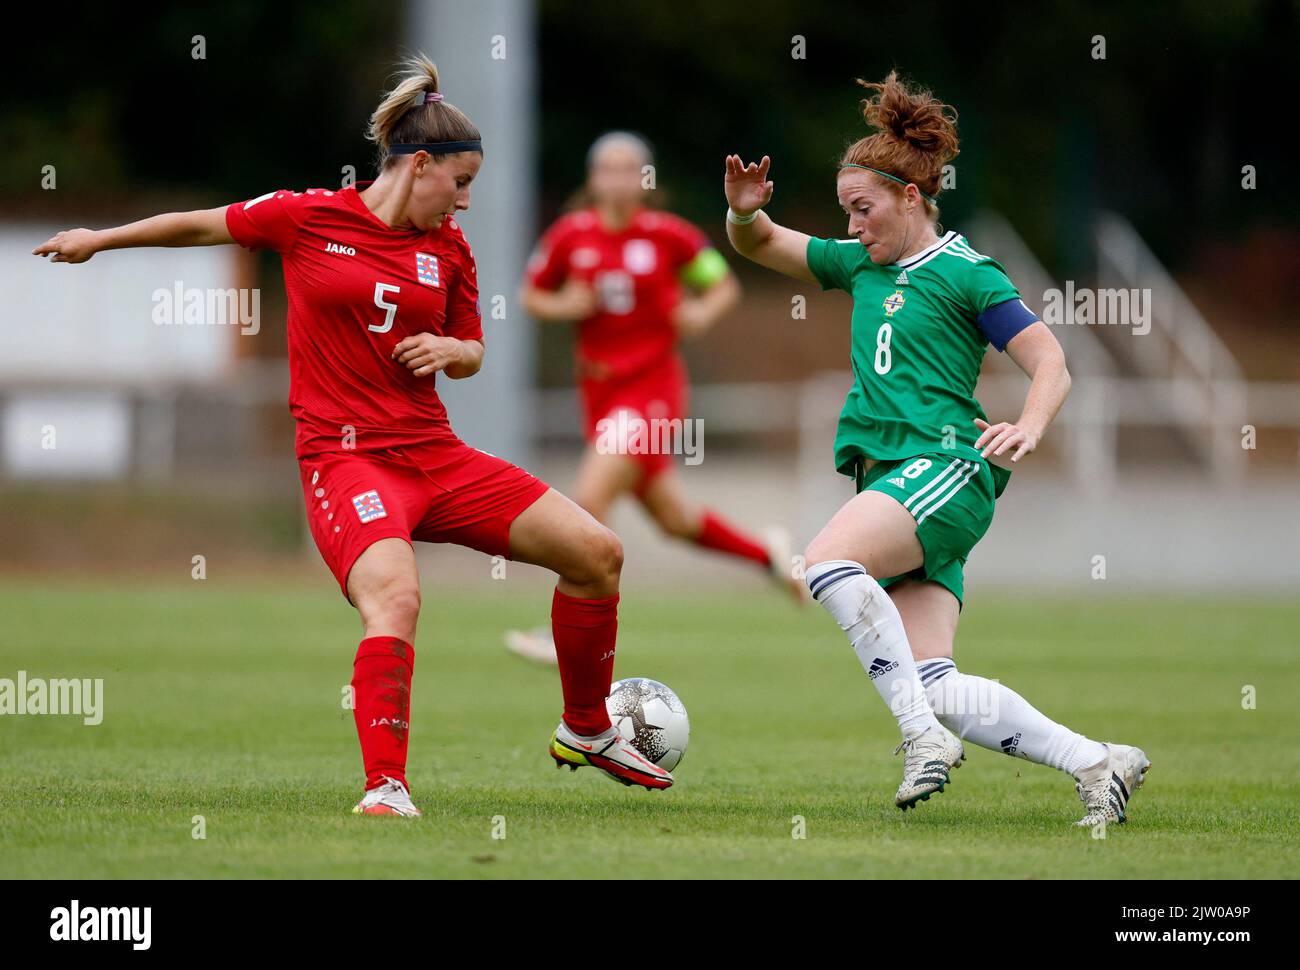 Soccer Football - FIFA Women's World Cup Australia and New Zealand - UEFA Qualifiers - Group D - Luxembourg v Northern Ireland - Stade Emile Mayrisch, Esch-sur-Alzette, Luxembourg - September 2, 2022 Luxembourg's Emma Kremer in action with Northern Ireland's Marissa Callaghan REUTERS/Gonzalo Fuentes Stock Photo